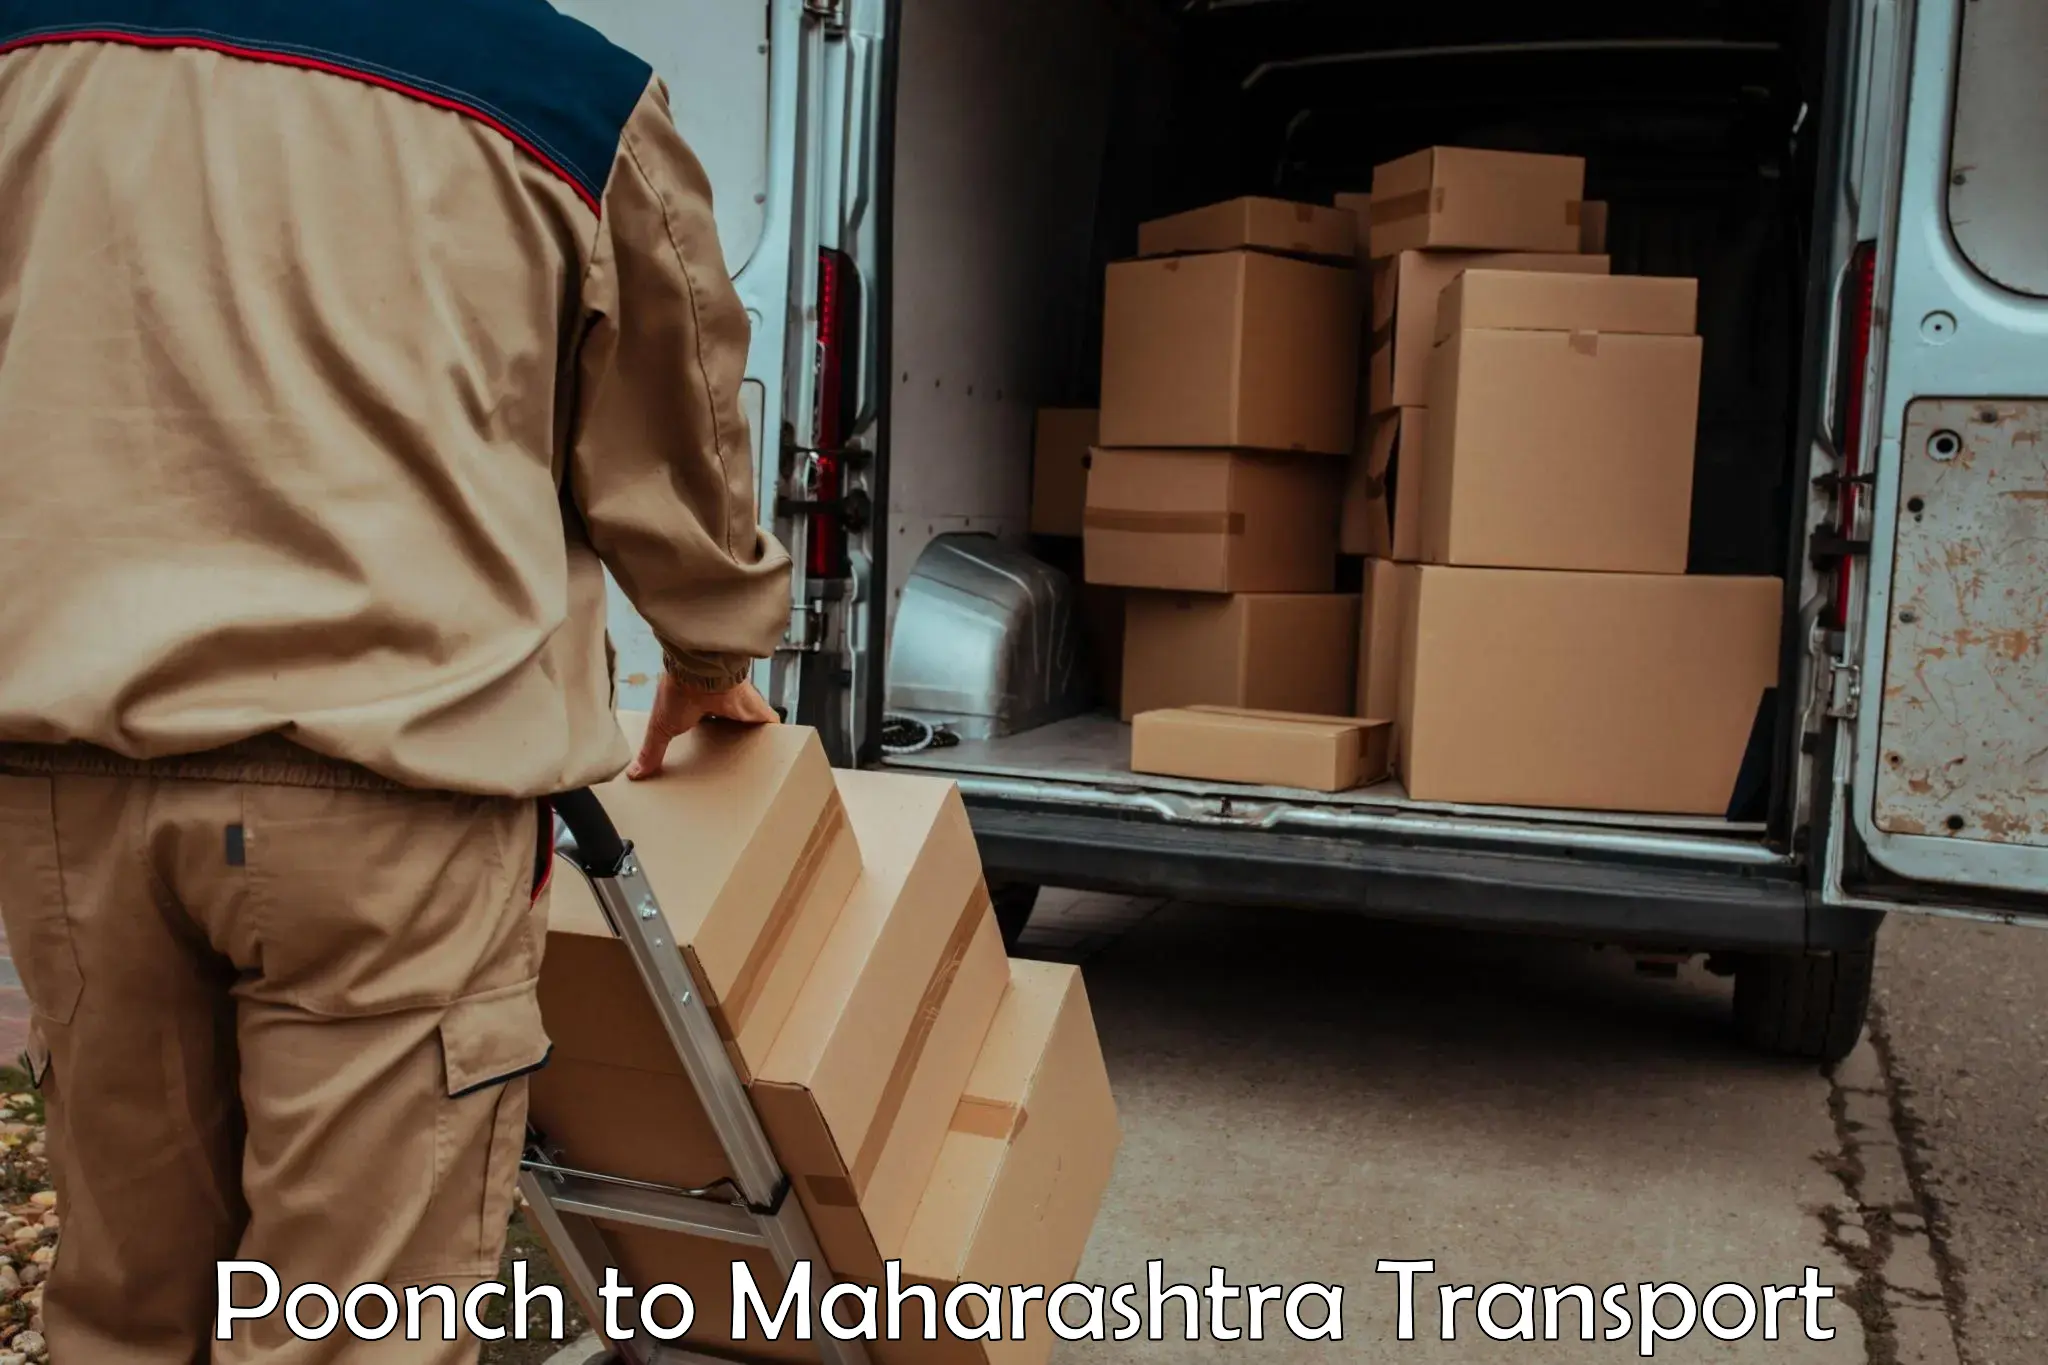 Road transport online services in Poonch to Maharashtra